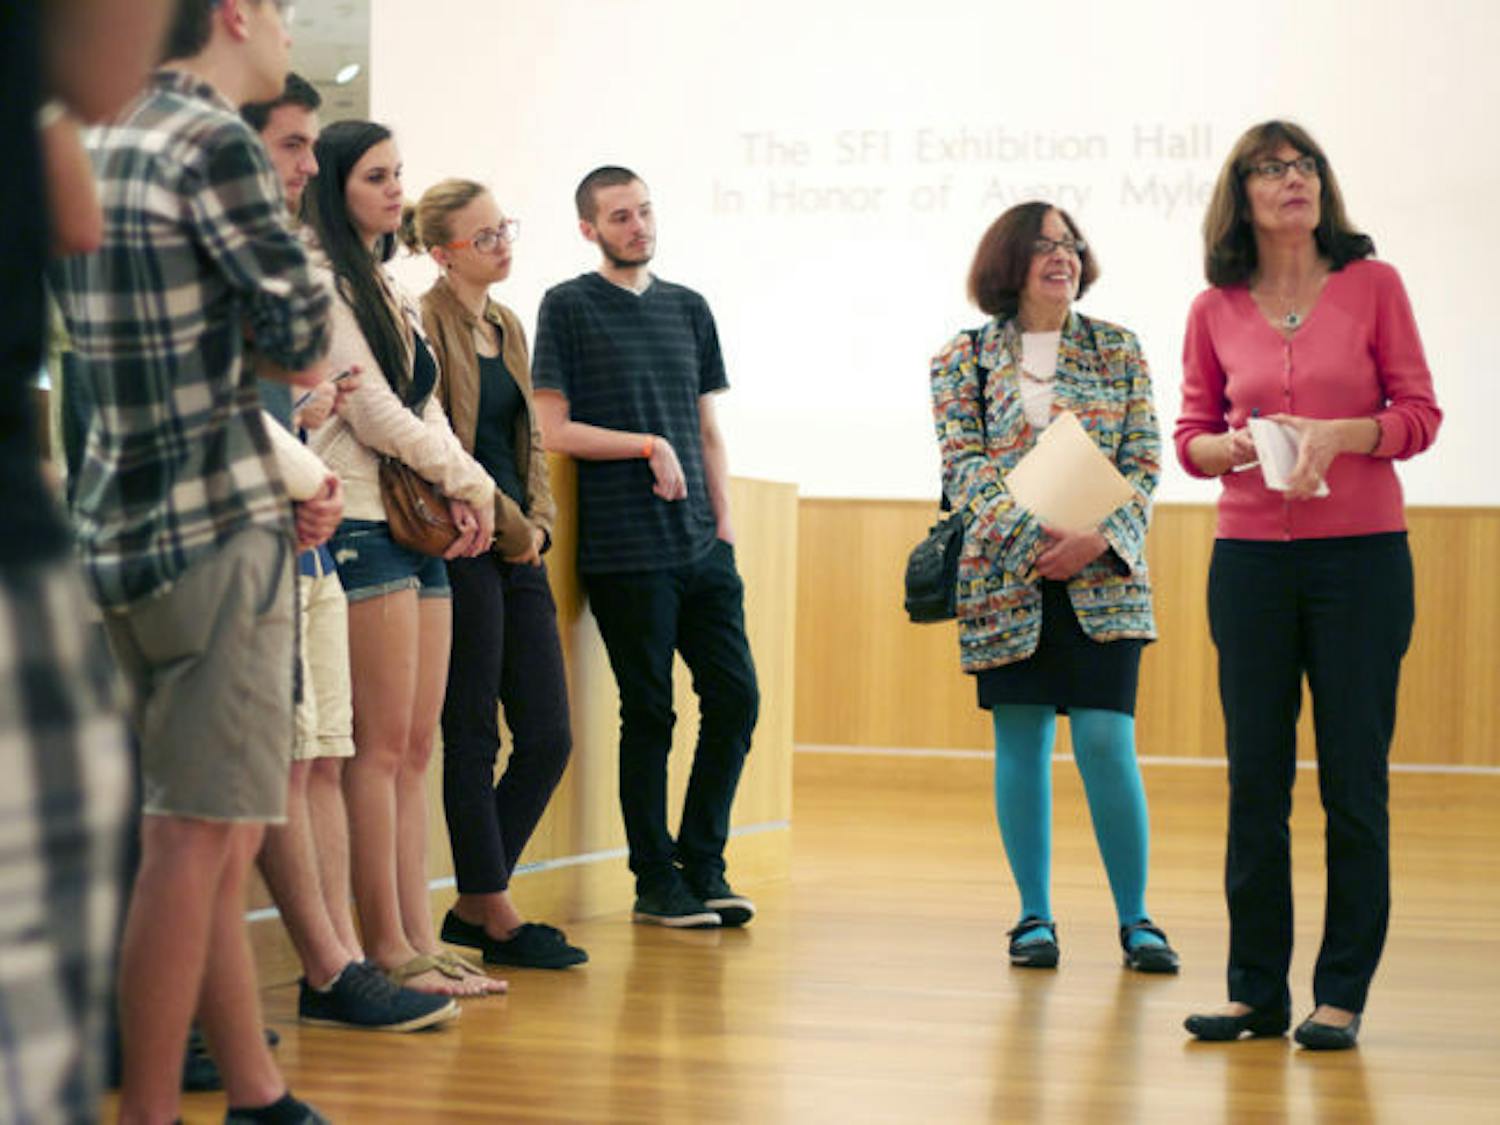 Professor Maureen Turim, second from the right, speaks to her film montage class at the Samuel P. Harn Museum of Art on Wednesday morning, comparing the artwork on display to films the group viewed in class.